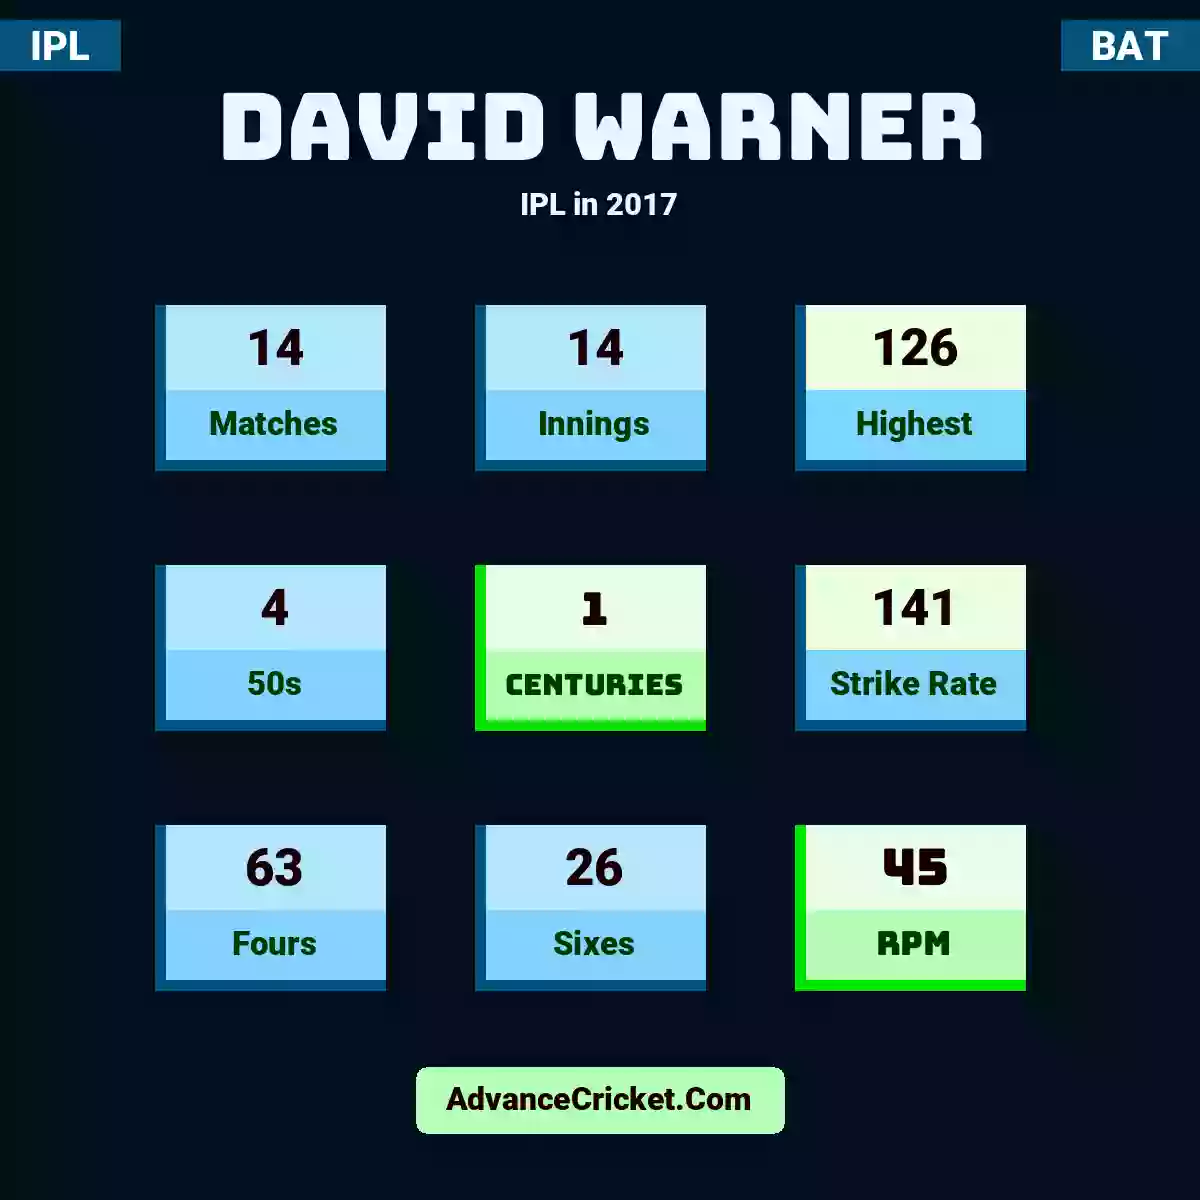 David Warner IPL  in 2017, David Warner played 14 matches, scored 126 runs as highest, 4 half-centuries, and 1 centuries, with a strike rate of 141. D.Warner hit 63 fours and 26 sixes, with an RPM of 45.